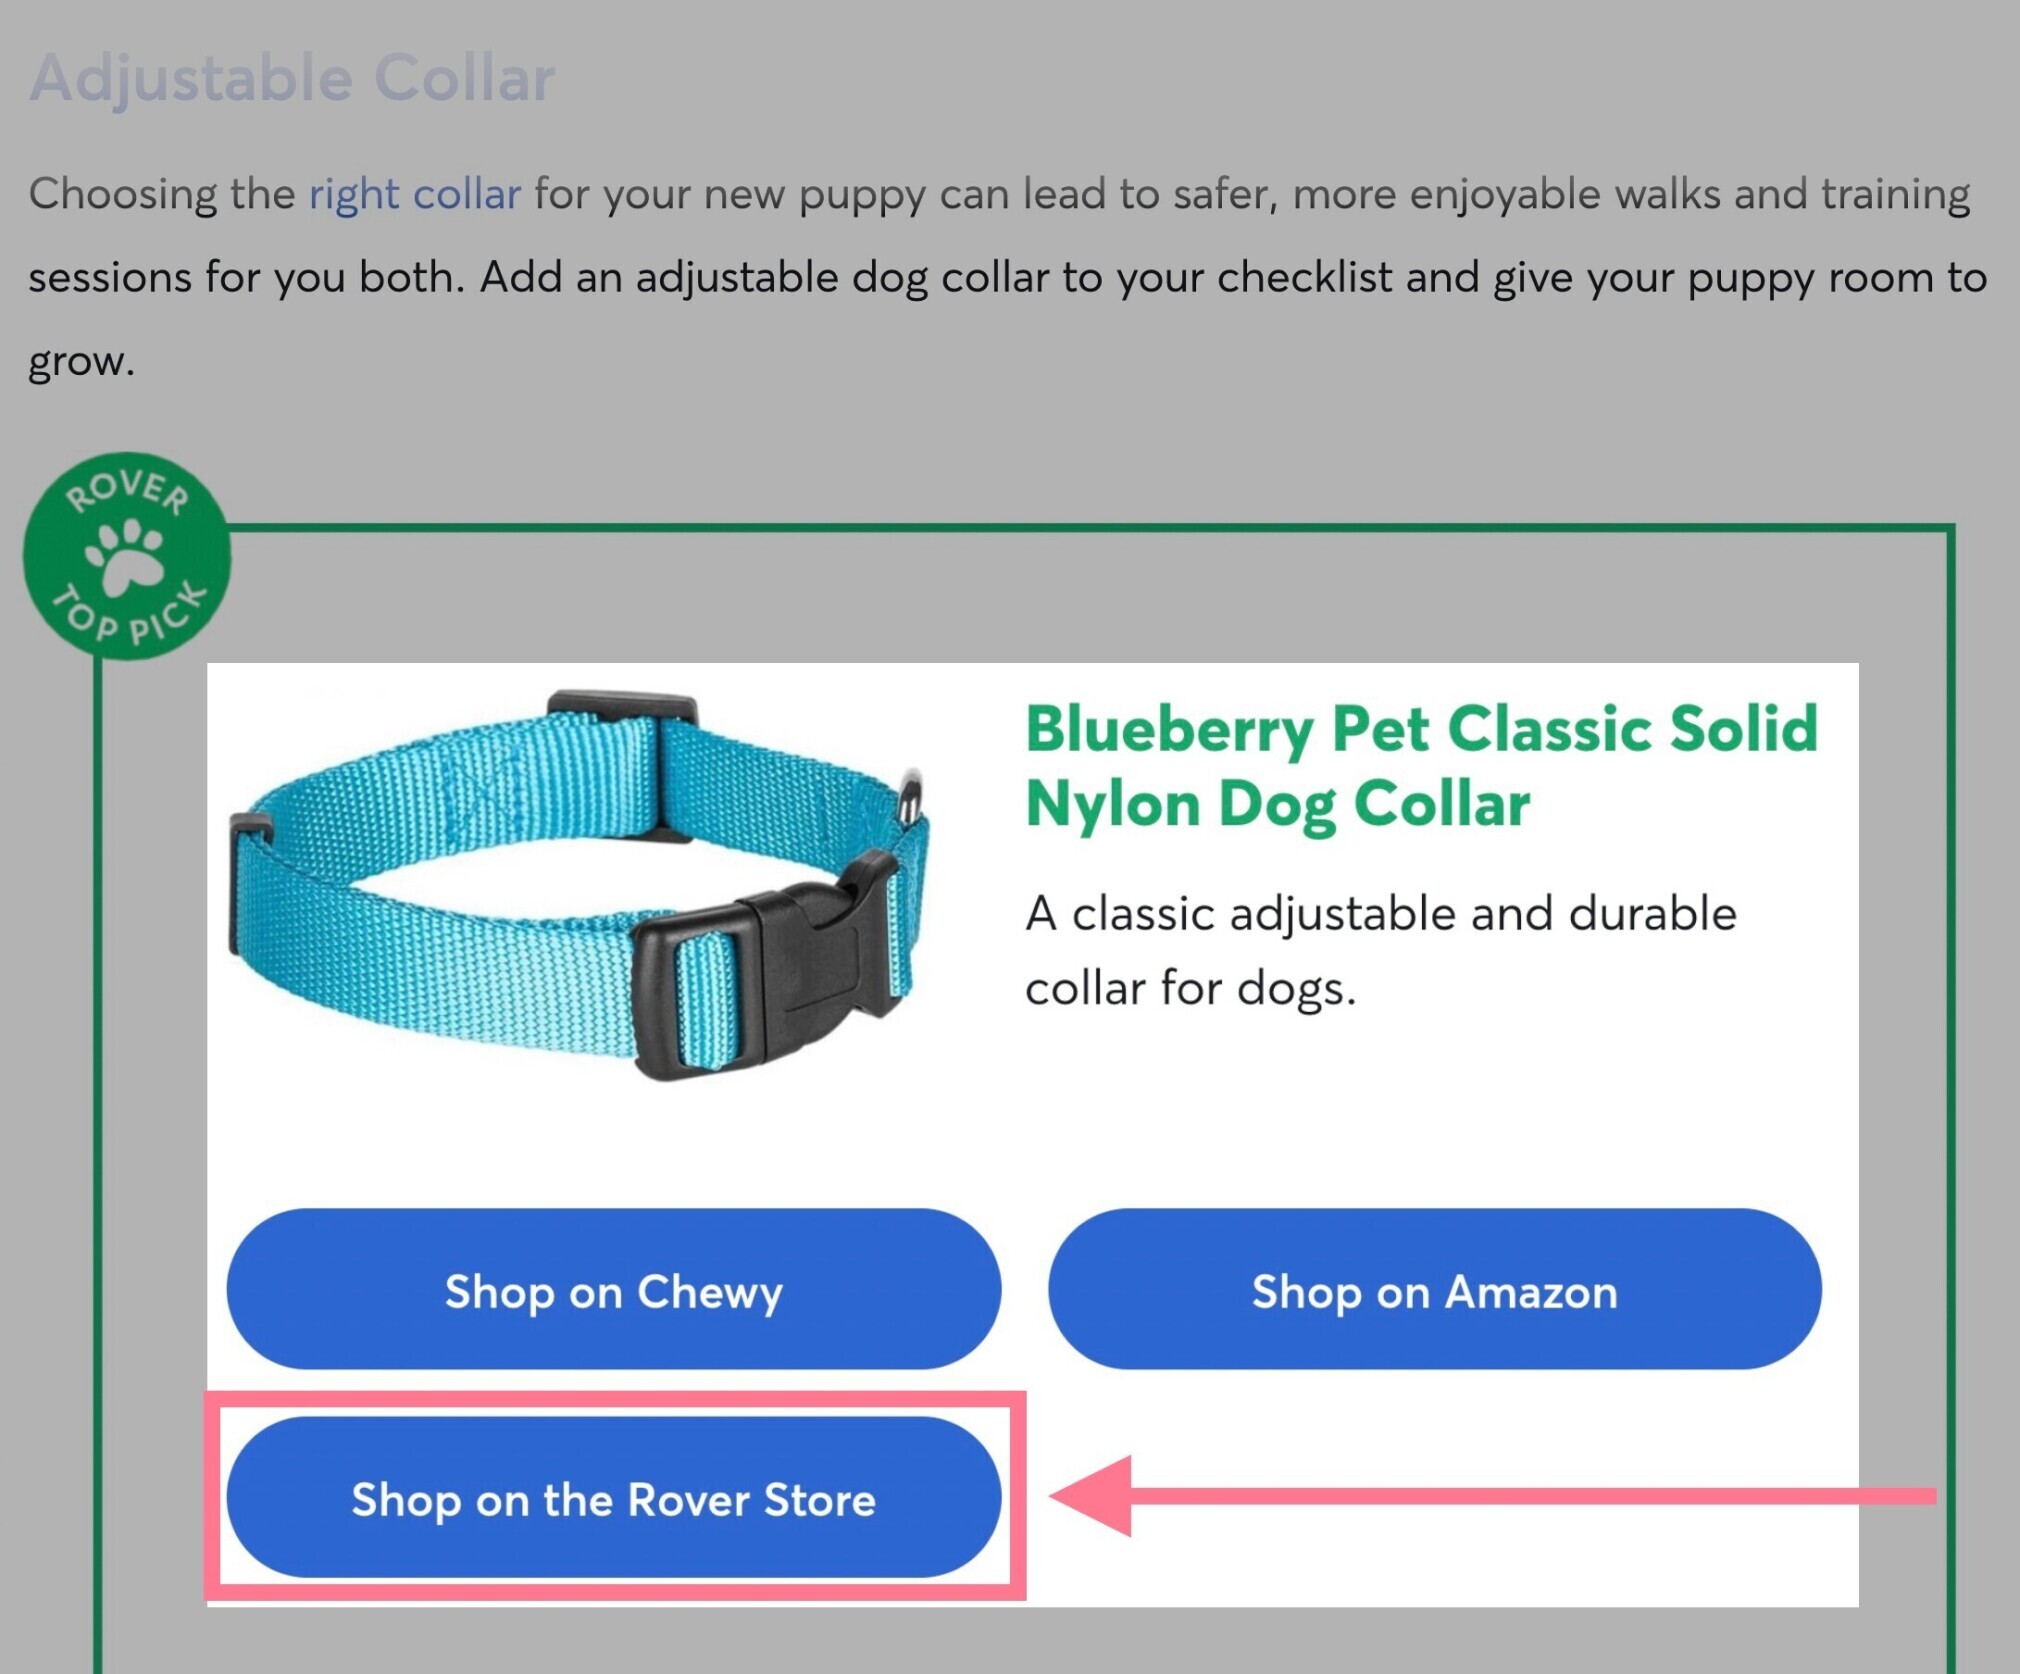 Rover promotes their product, a dog collar, within their blog post